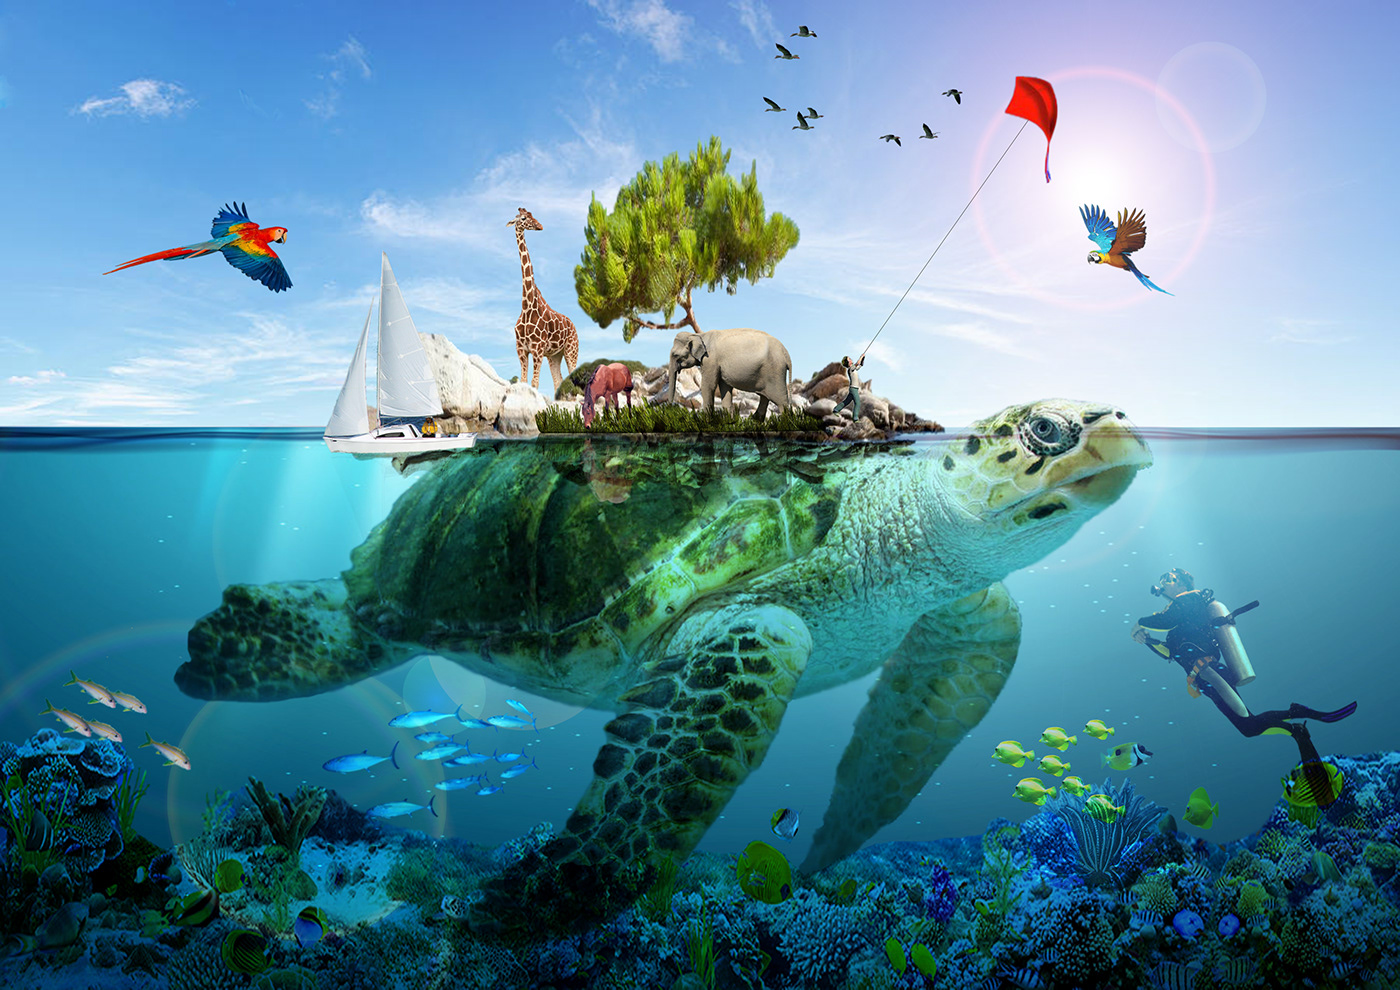 World-bearing Turtle is a myth of a giant turtle supporting or containing the world.